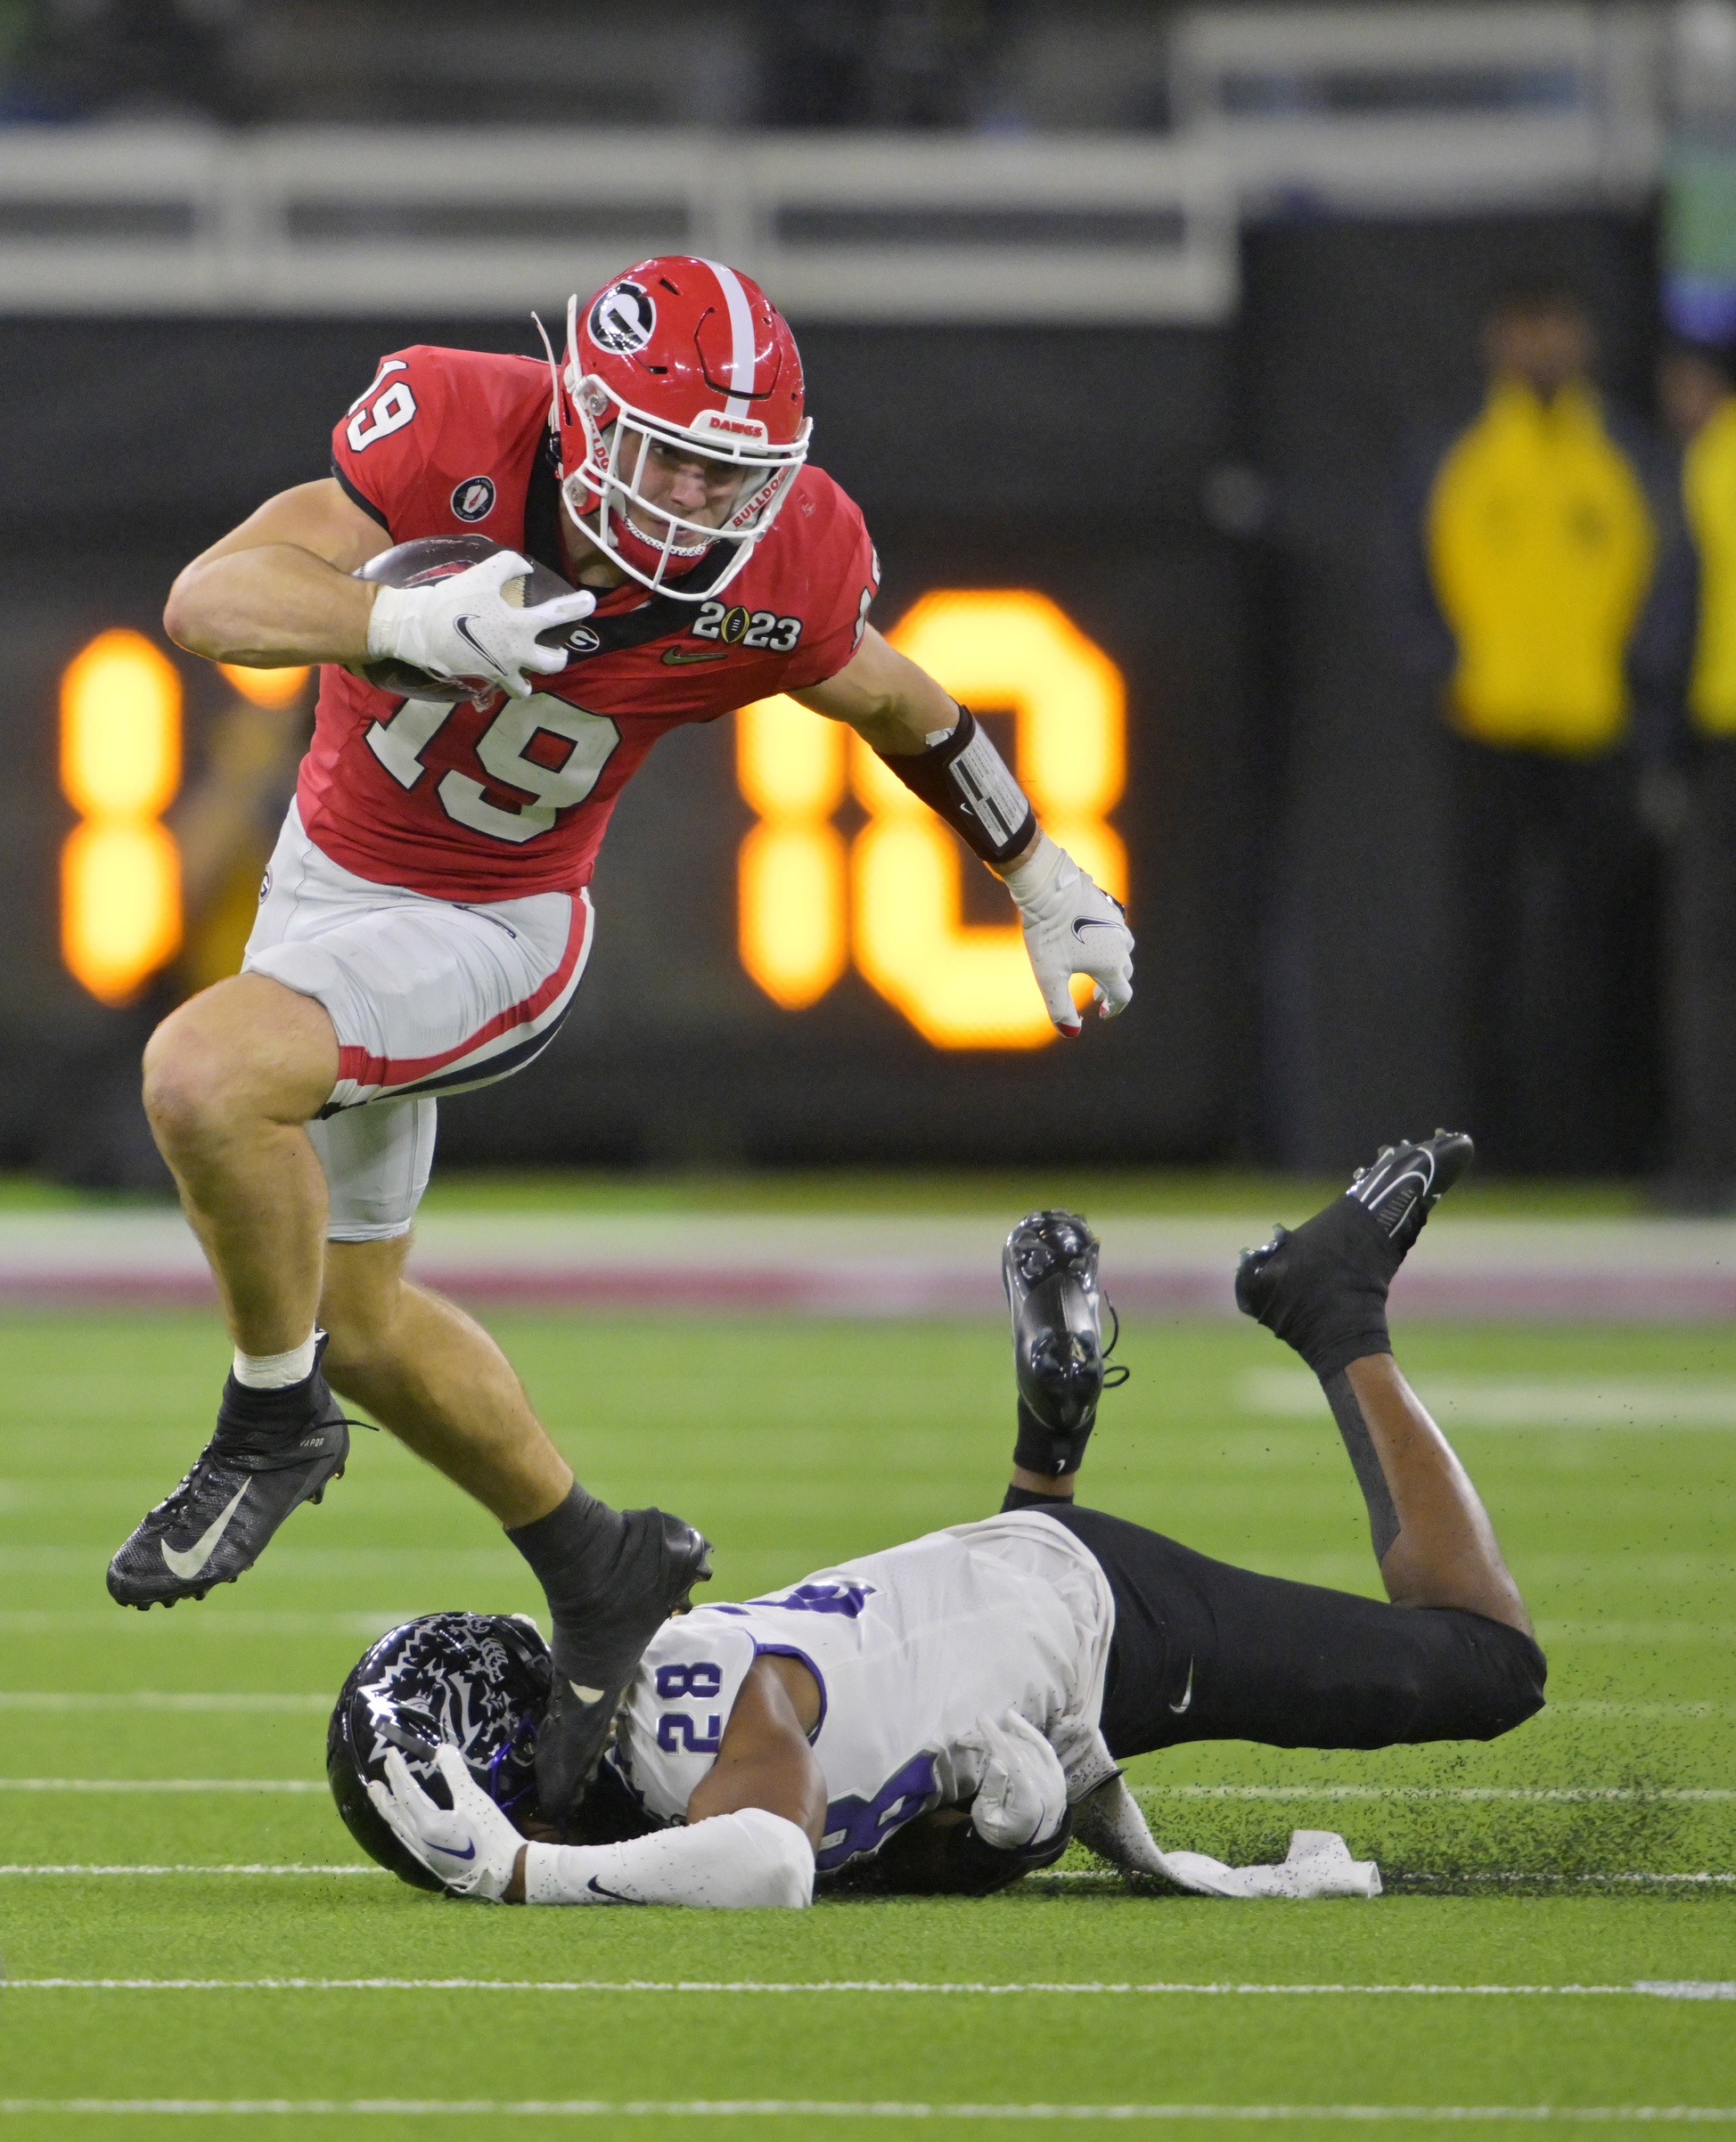 Georgia Bulldogs tight end Brock Bowers (19) gets past TCU Horned Frogs safety Millard Bradford (28) during the CFP national championship game. Mandatory Credit: Jayne Kamin-Oncea-USA TODAY Sports